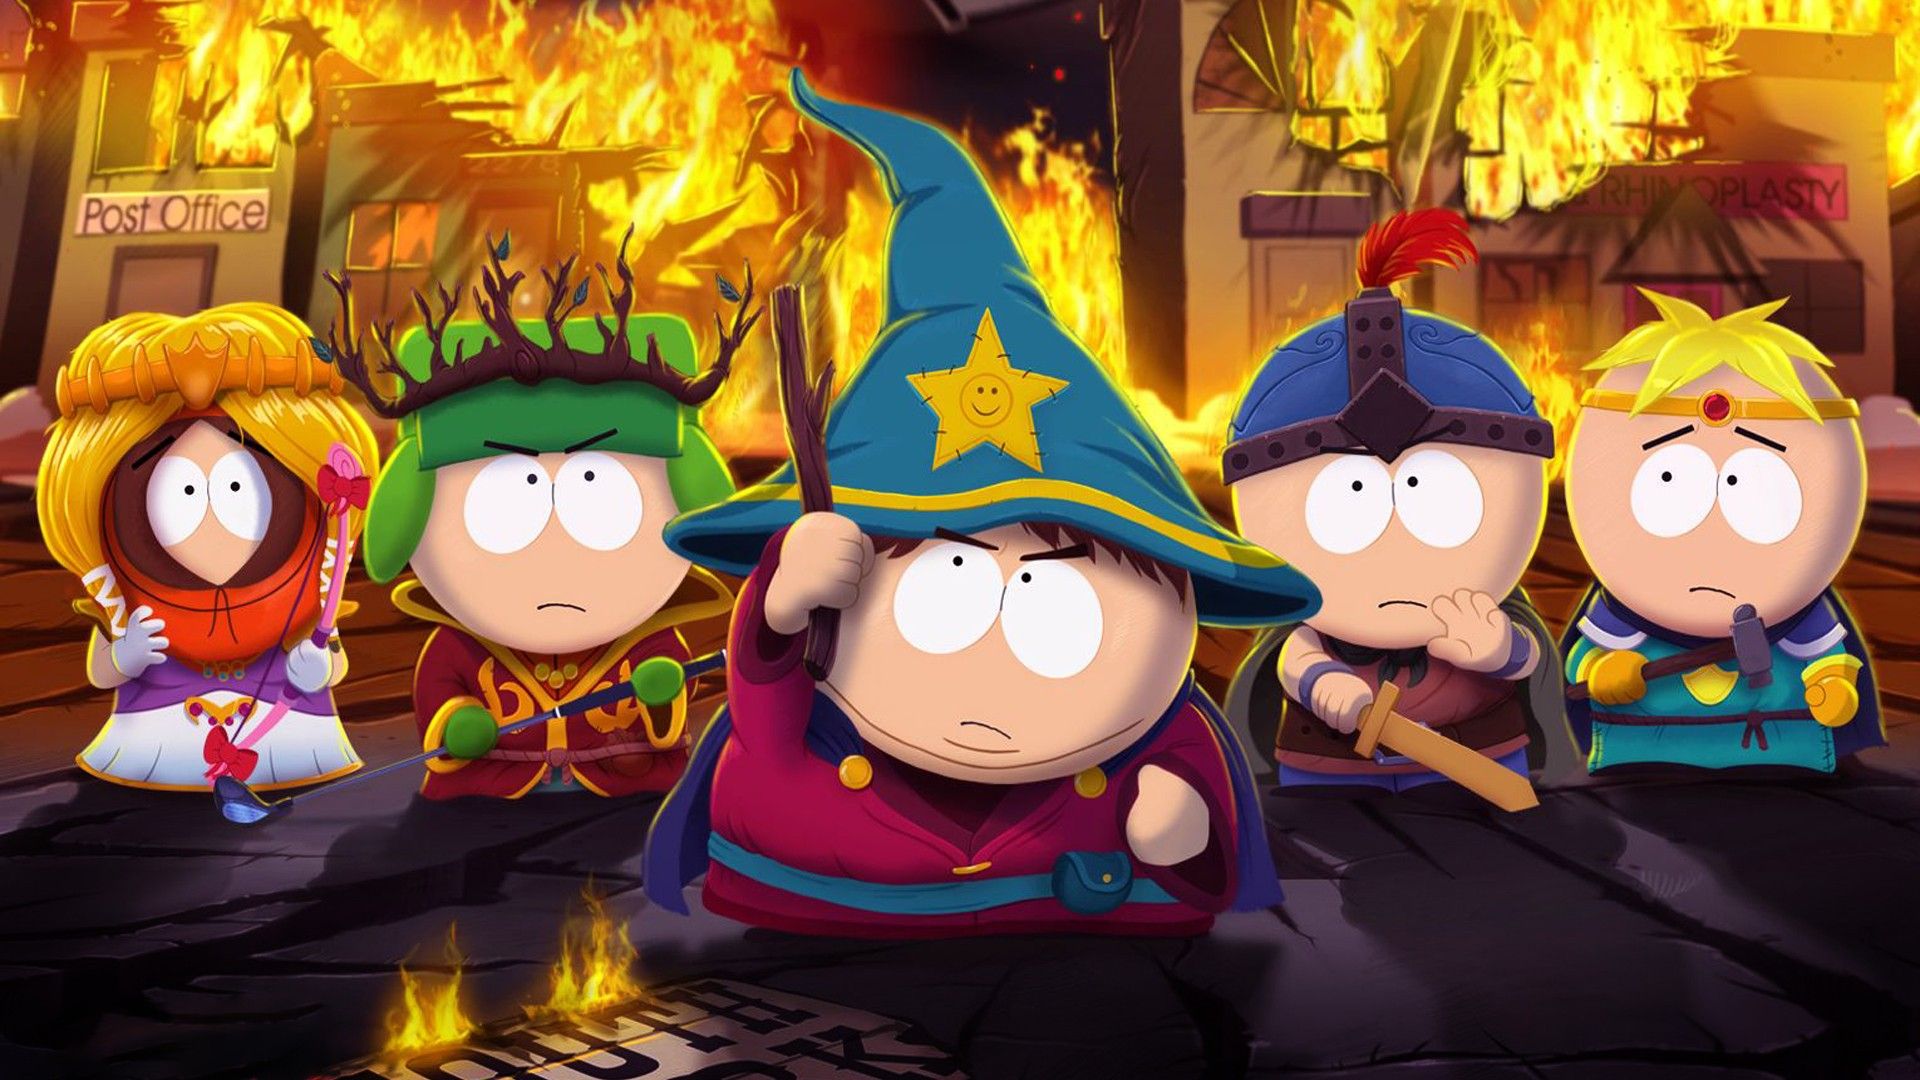 New South Park game could take inspiration from the series' first episode